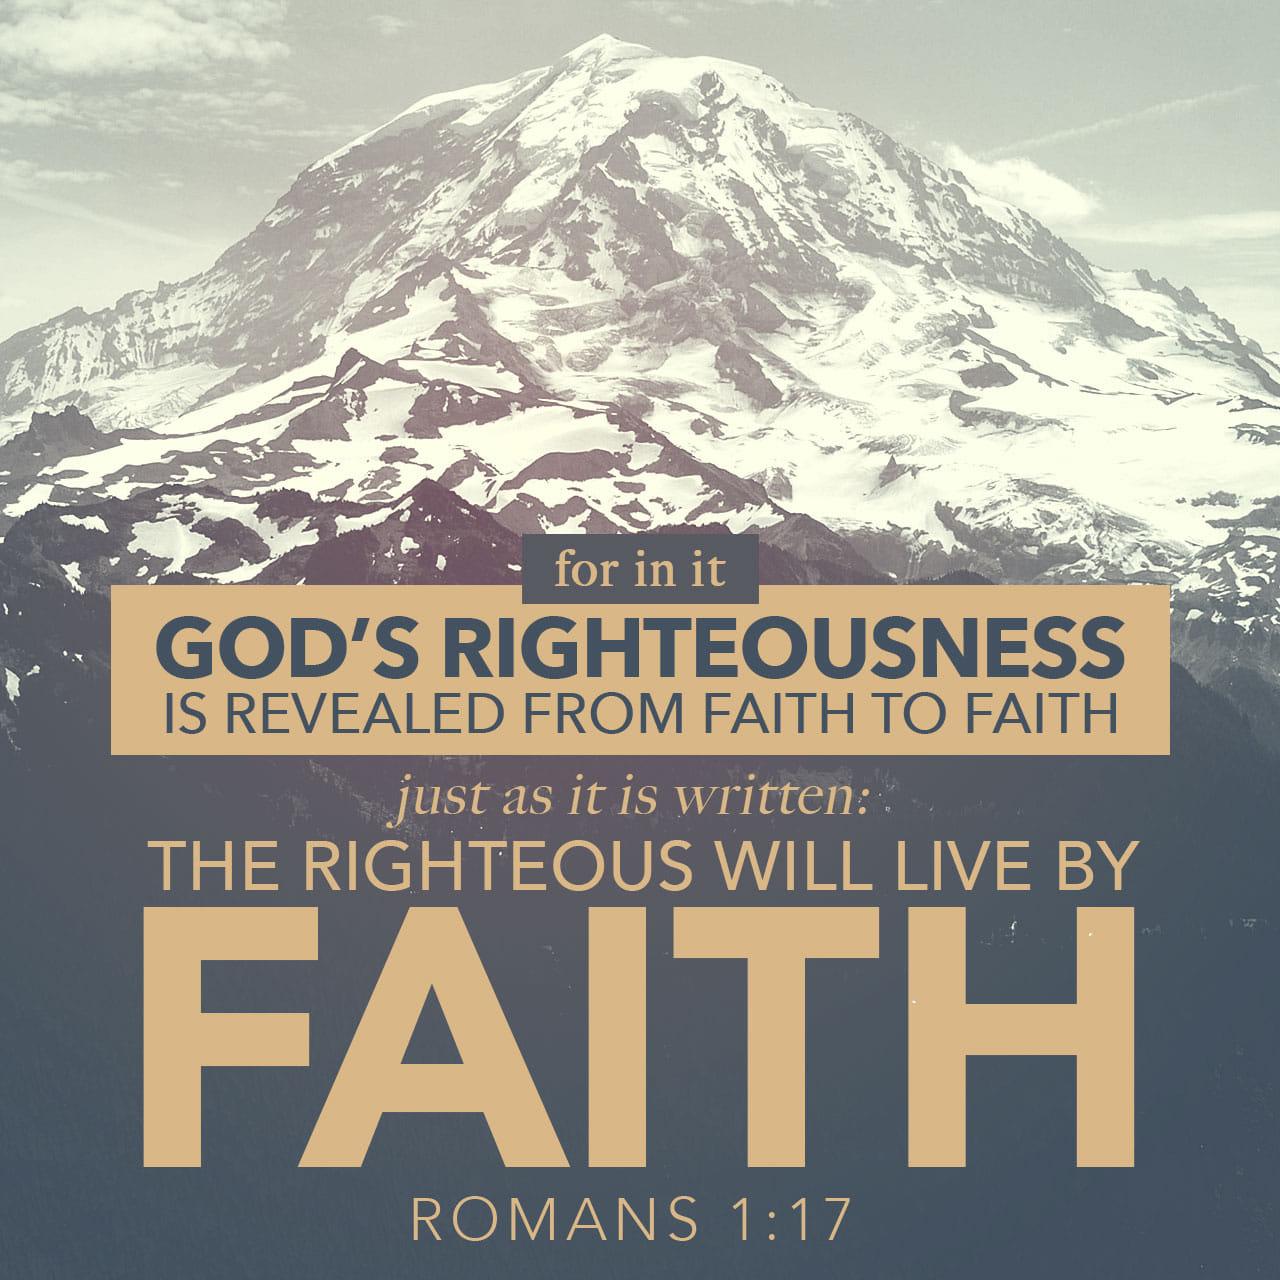 Bible Verse of the Day - day 90 - image 263 (Romans 1:1-17)